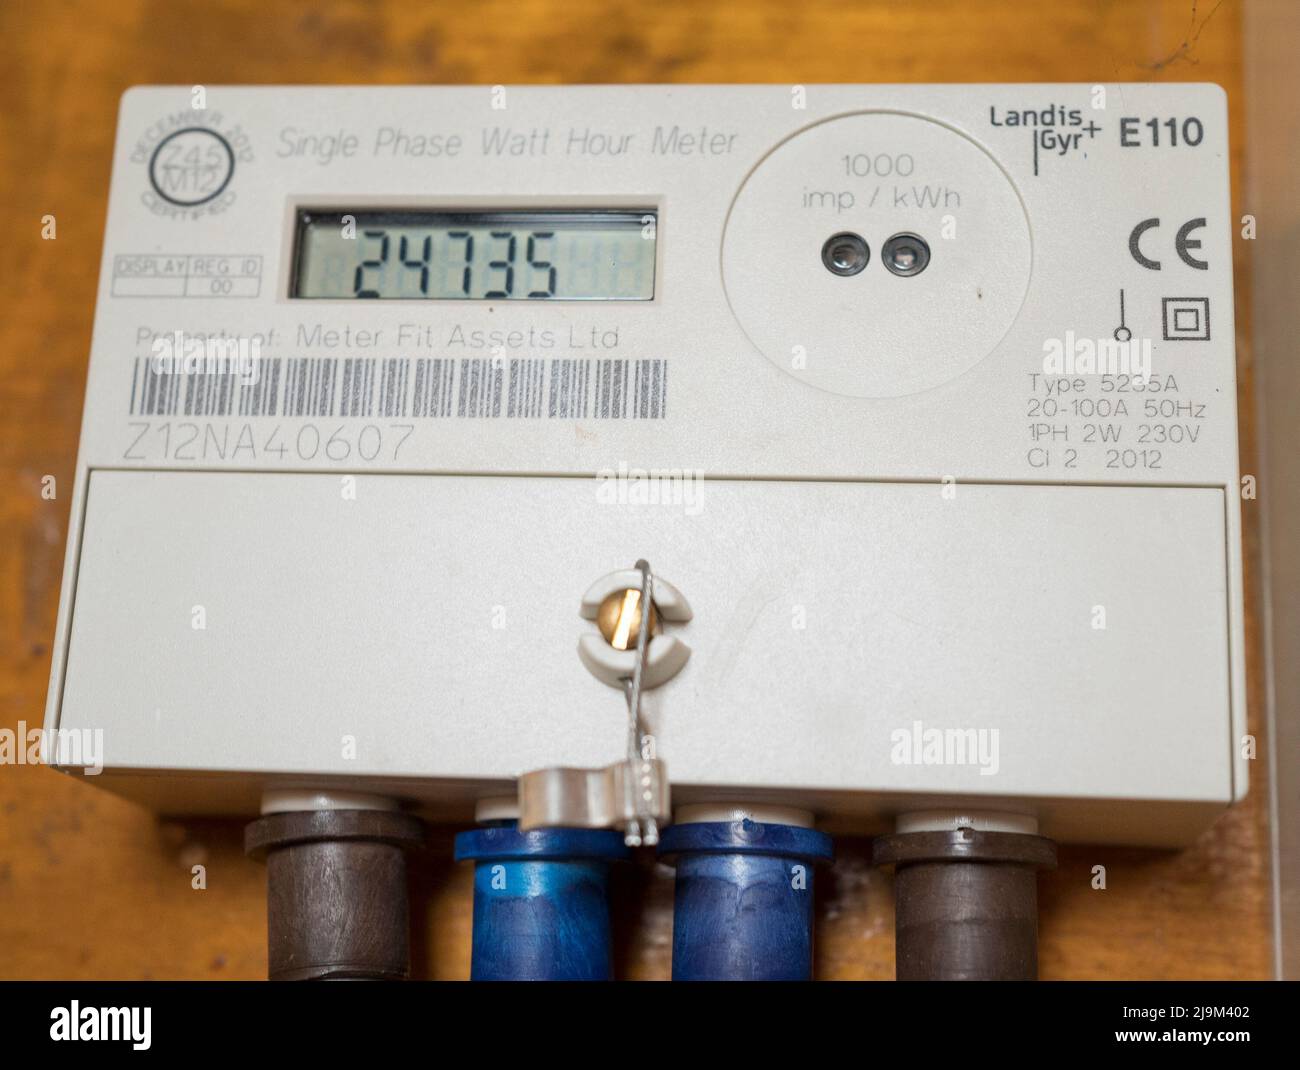 Close up of a Landis+Gyr domestic electricity meter in a residential, UK property, recording energy usage (Single Phase Watt Hour Meter). Stock Photo